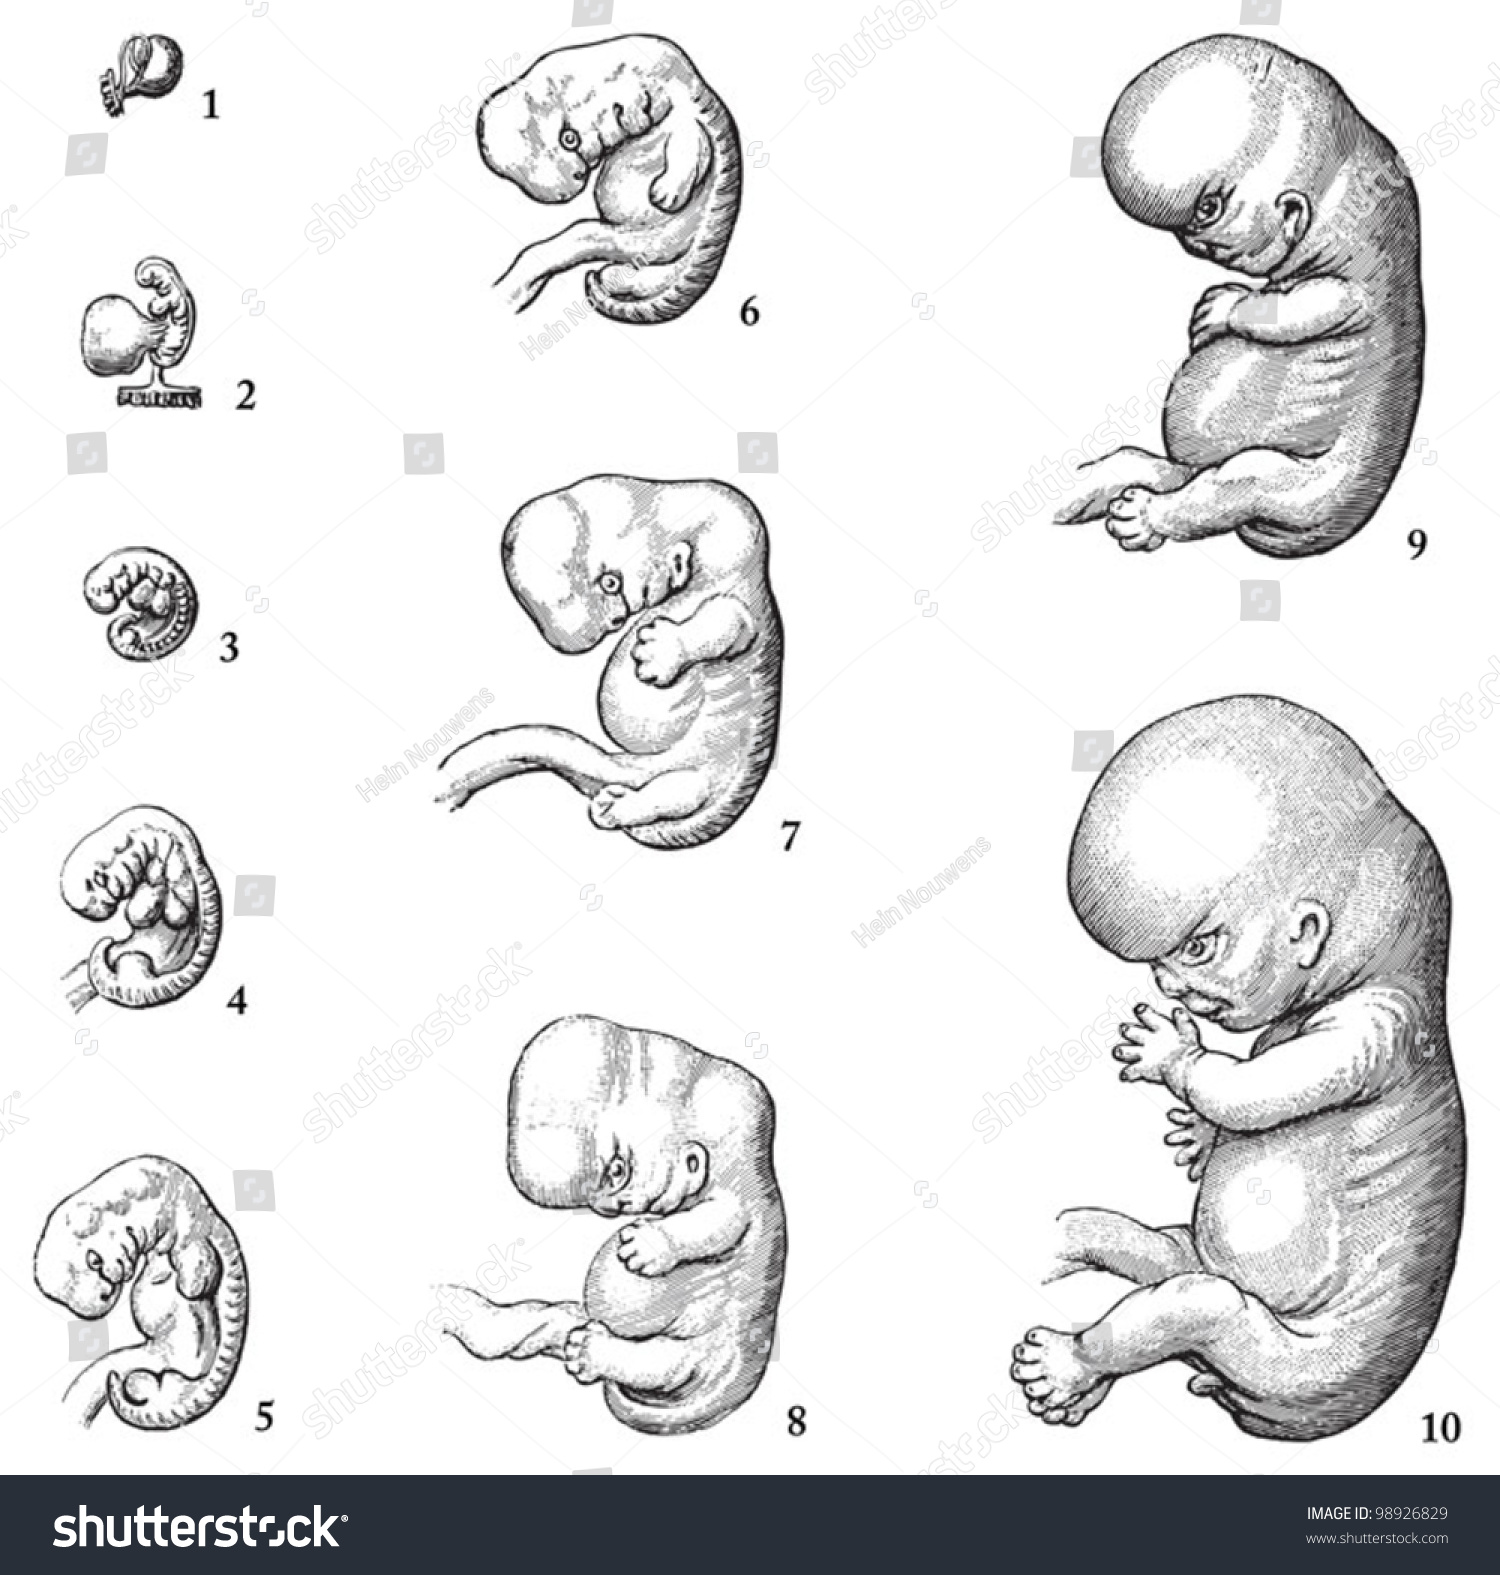 Pictures Of A Growing Human Embryo 102